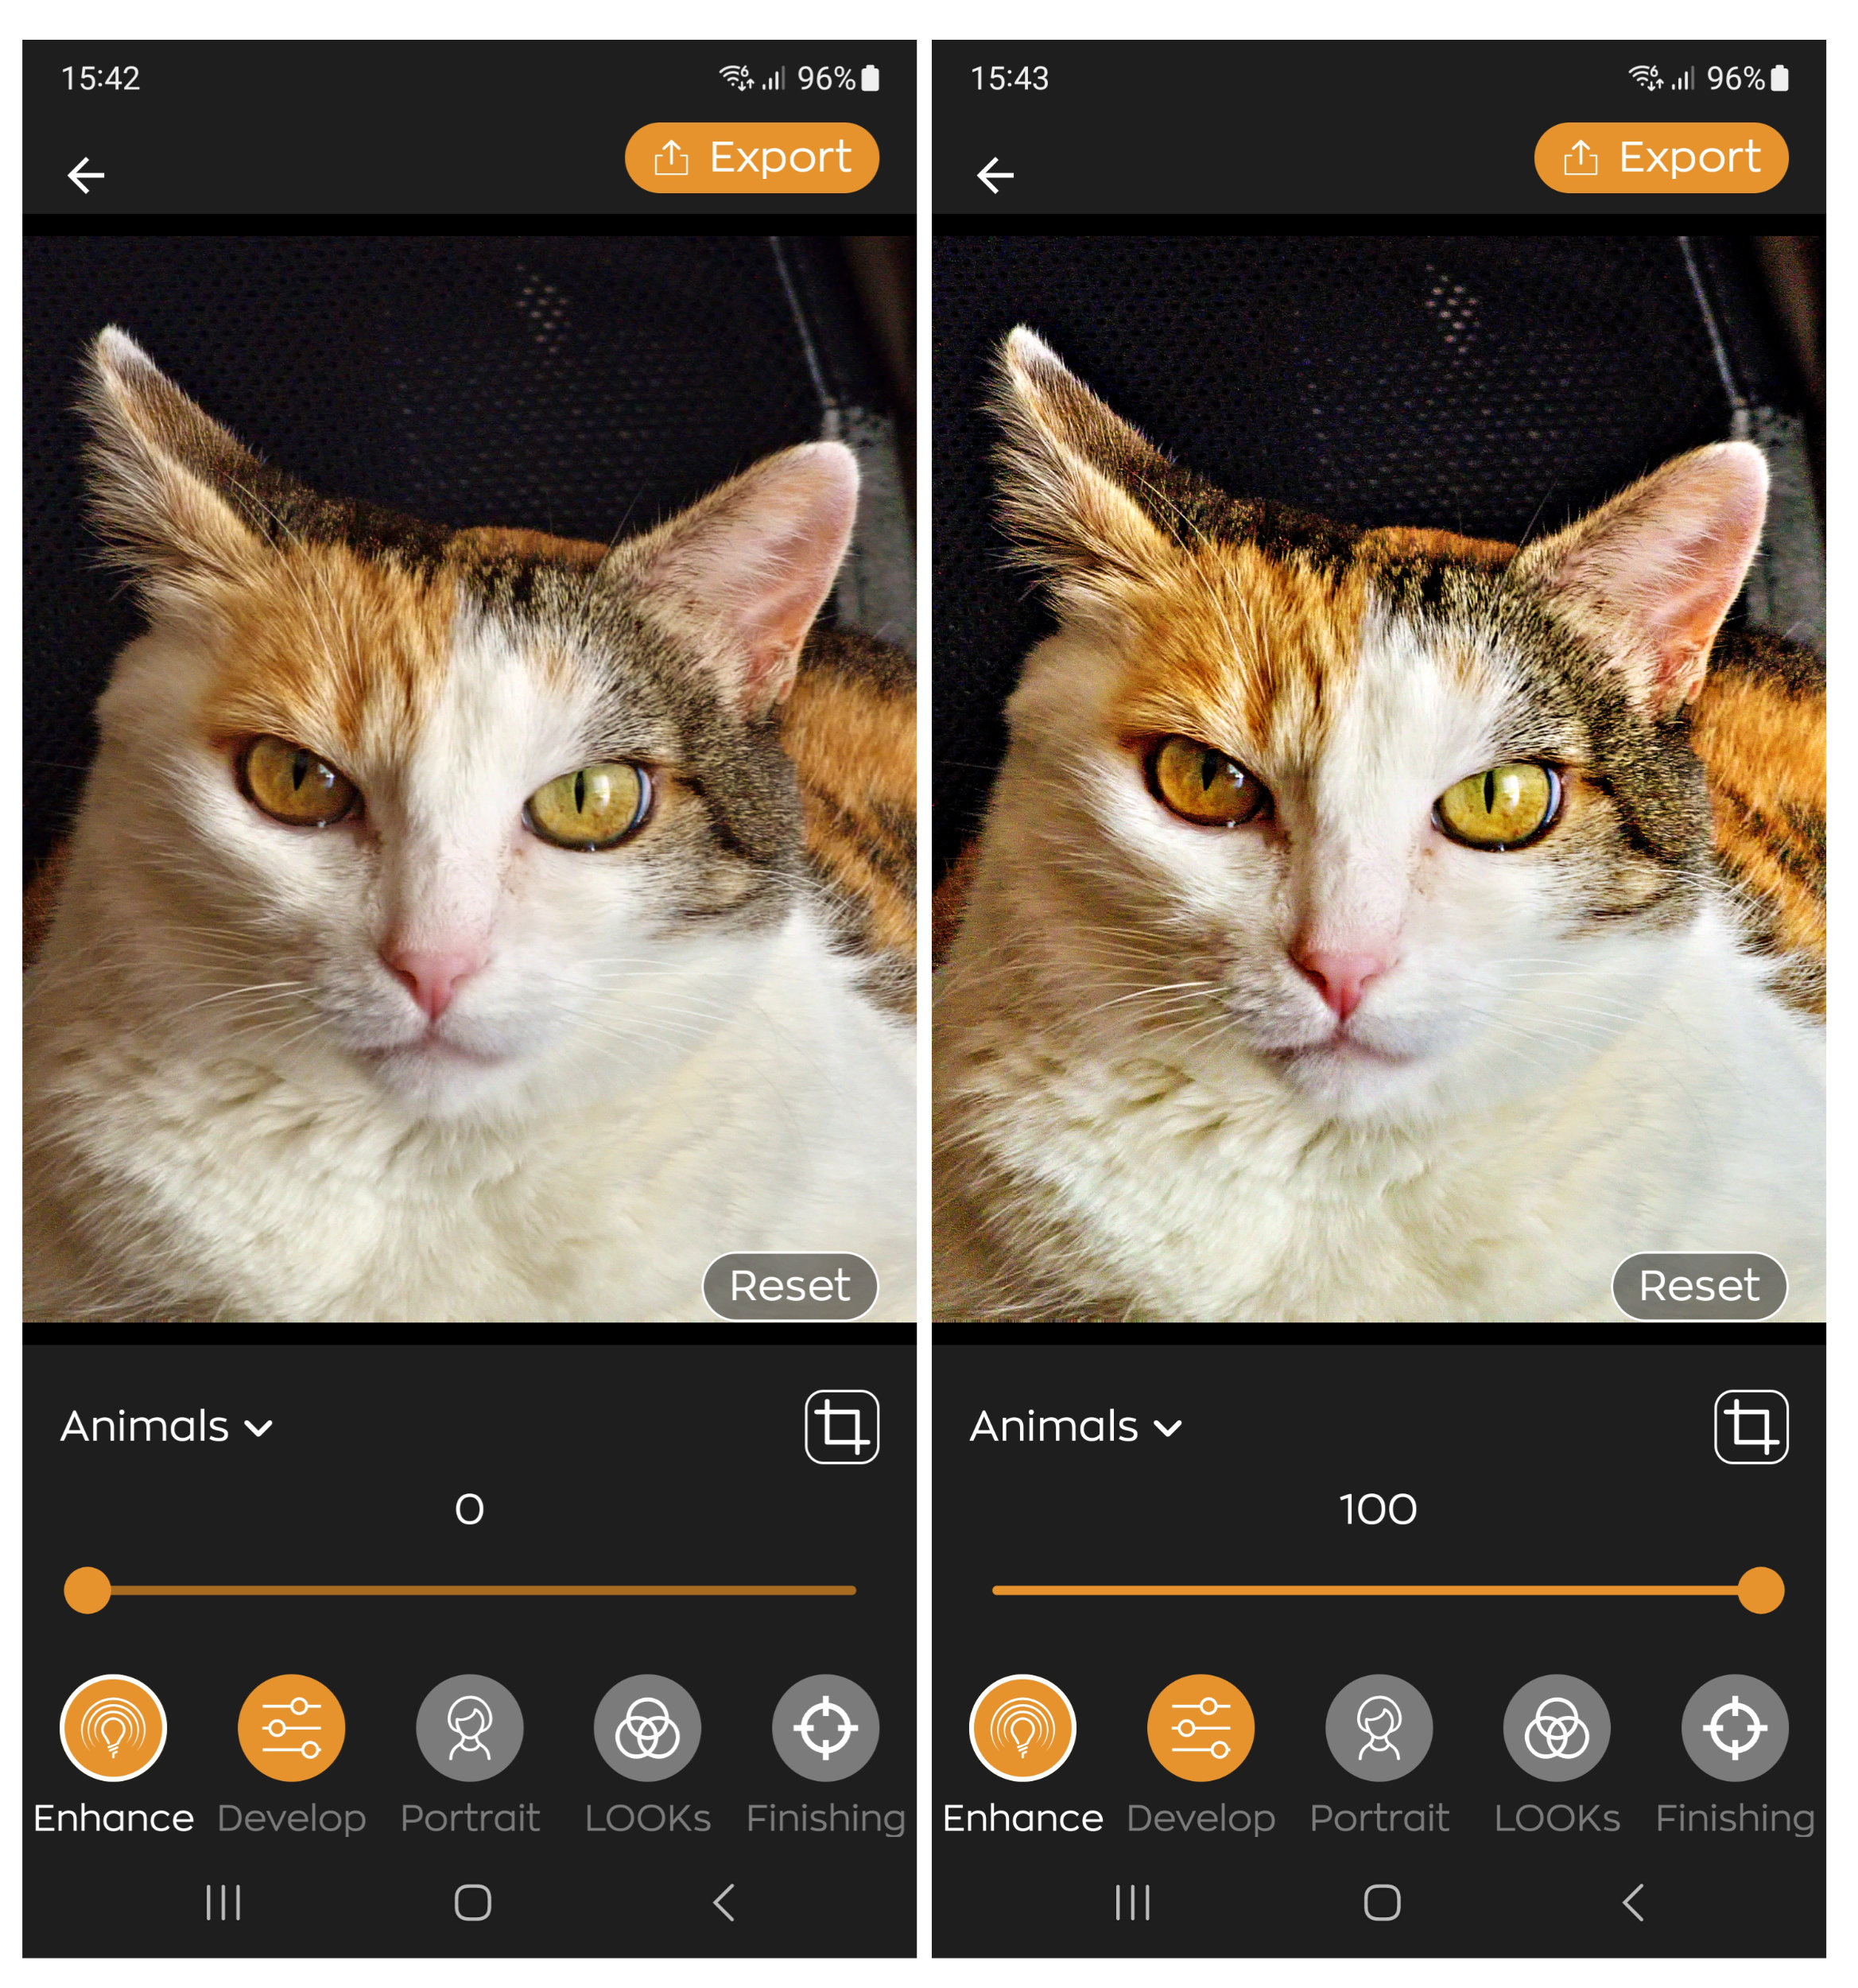 First contact: Radiant Photo Mobile, a photo editor for smartphone